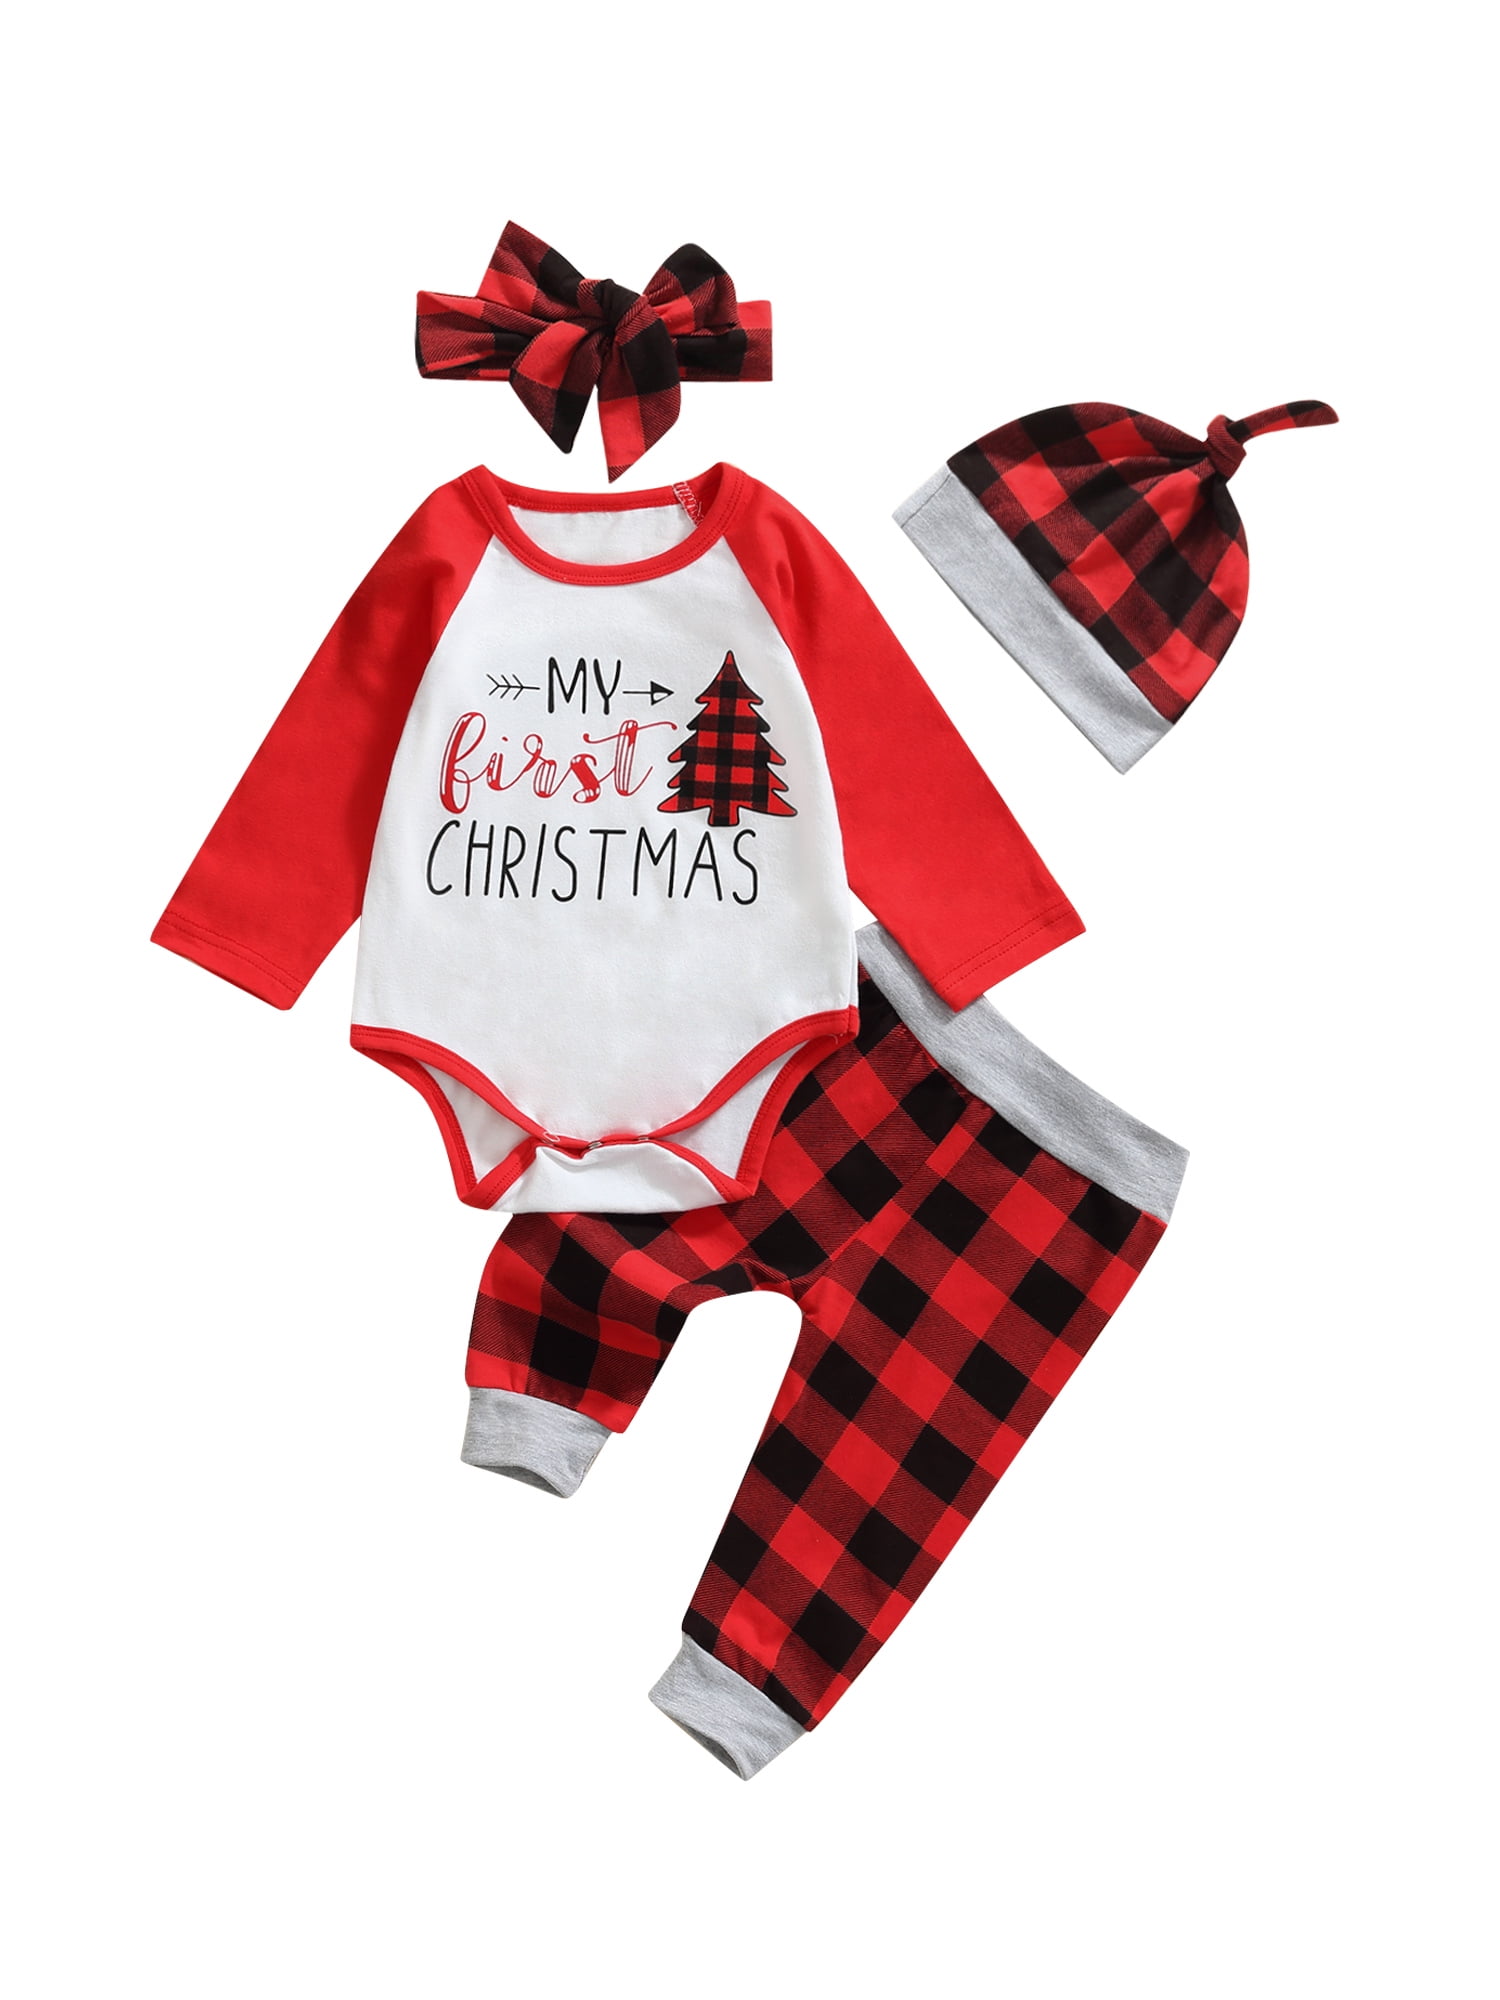 My First Christmas Outfits Toddler Baby Girl Long Sleeve Rompers Bodysuit Santa Claus Pants Hat Fall Winter Pajamas Clothes